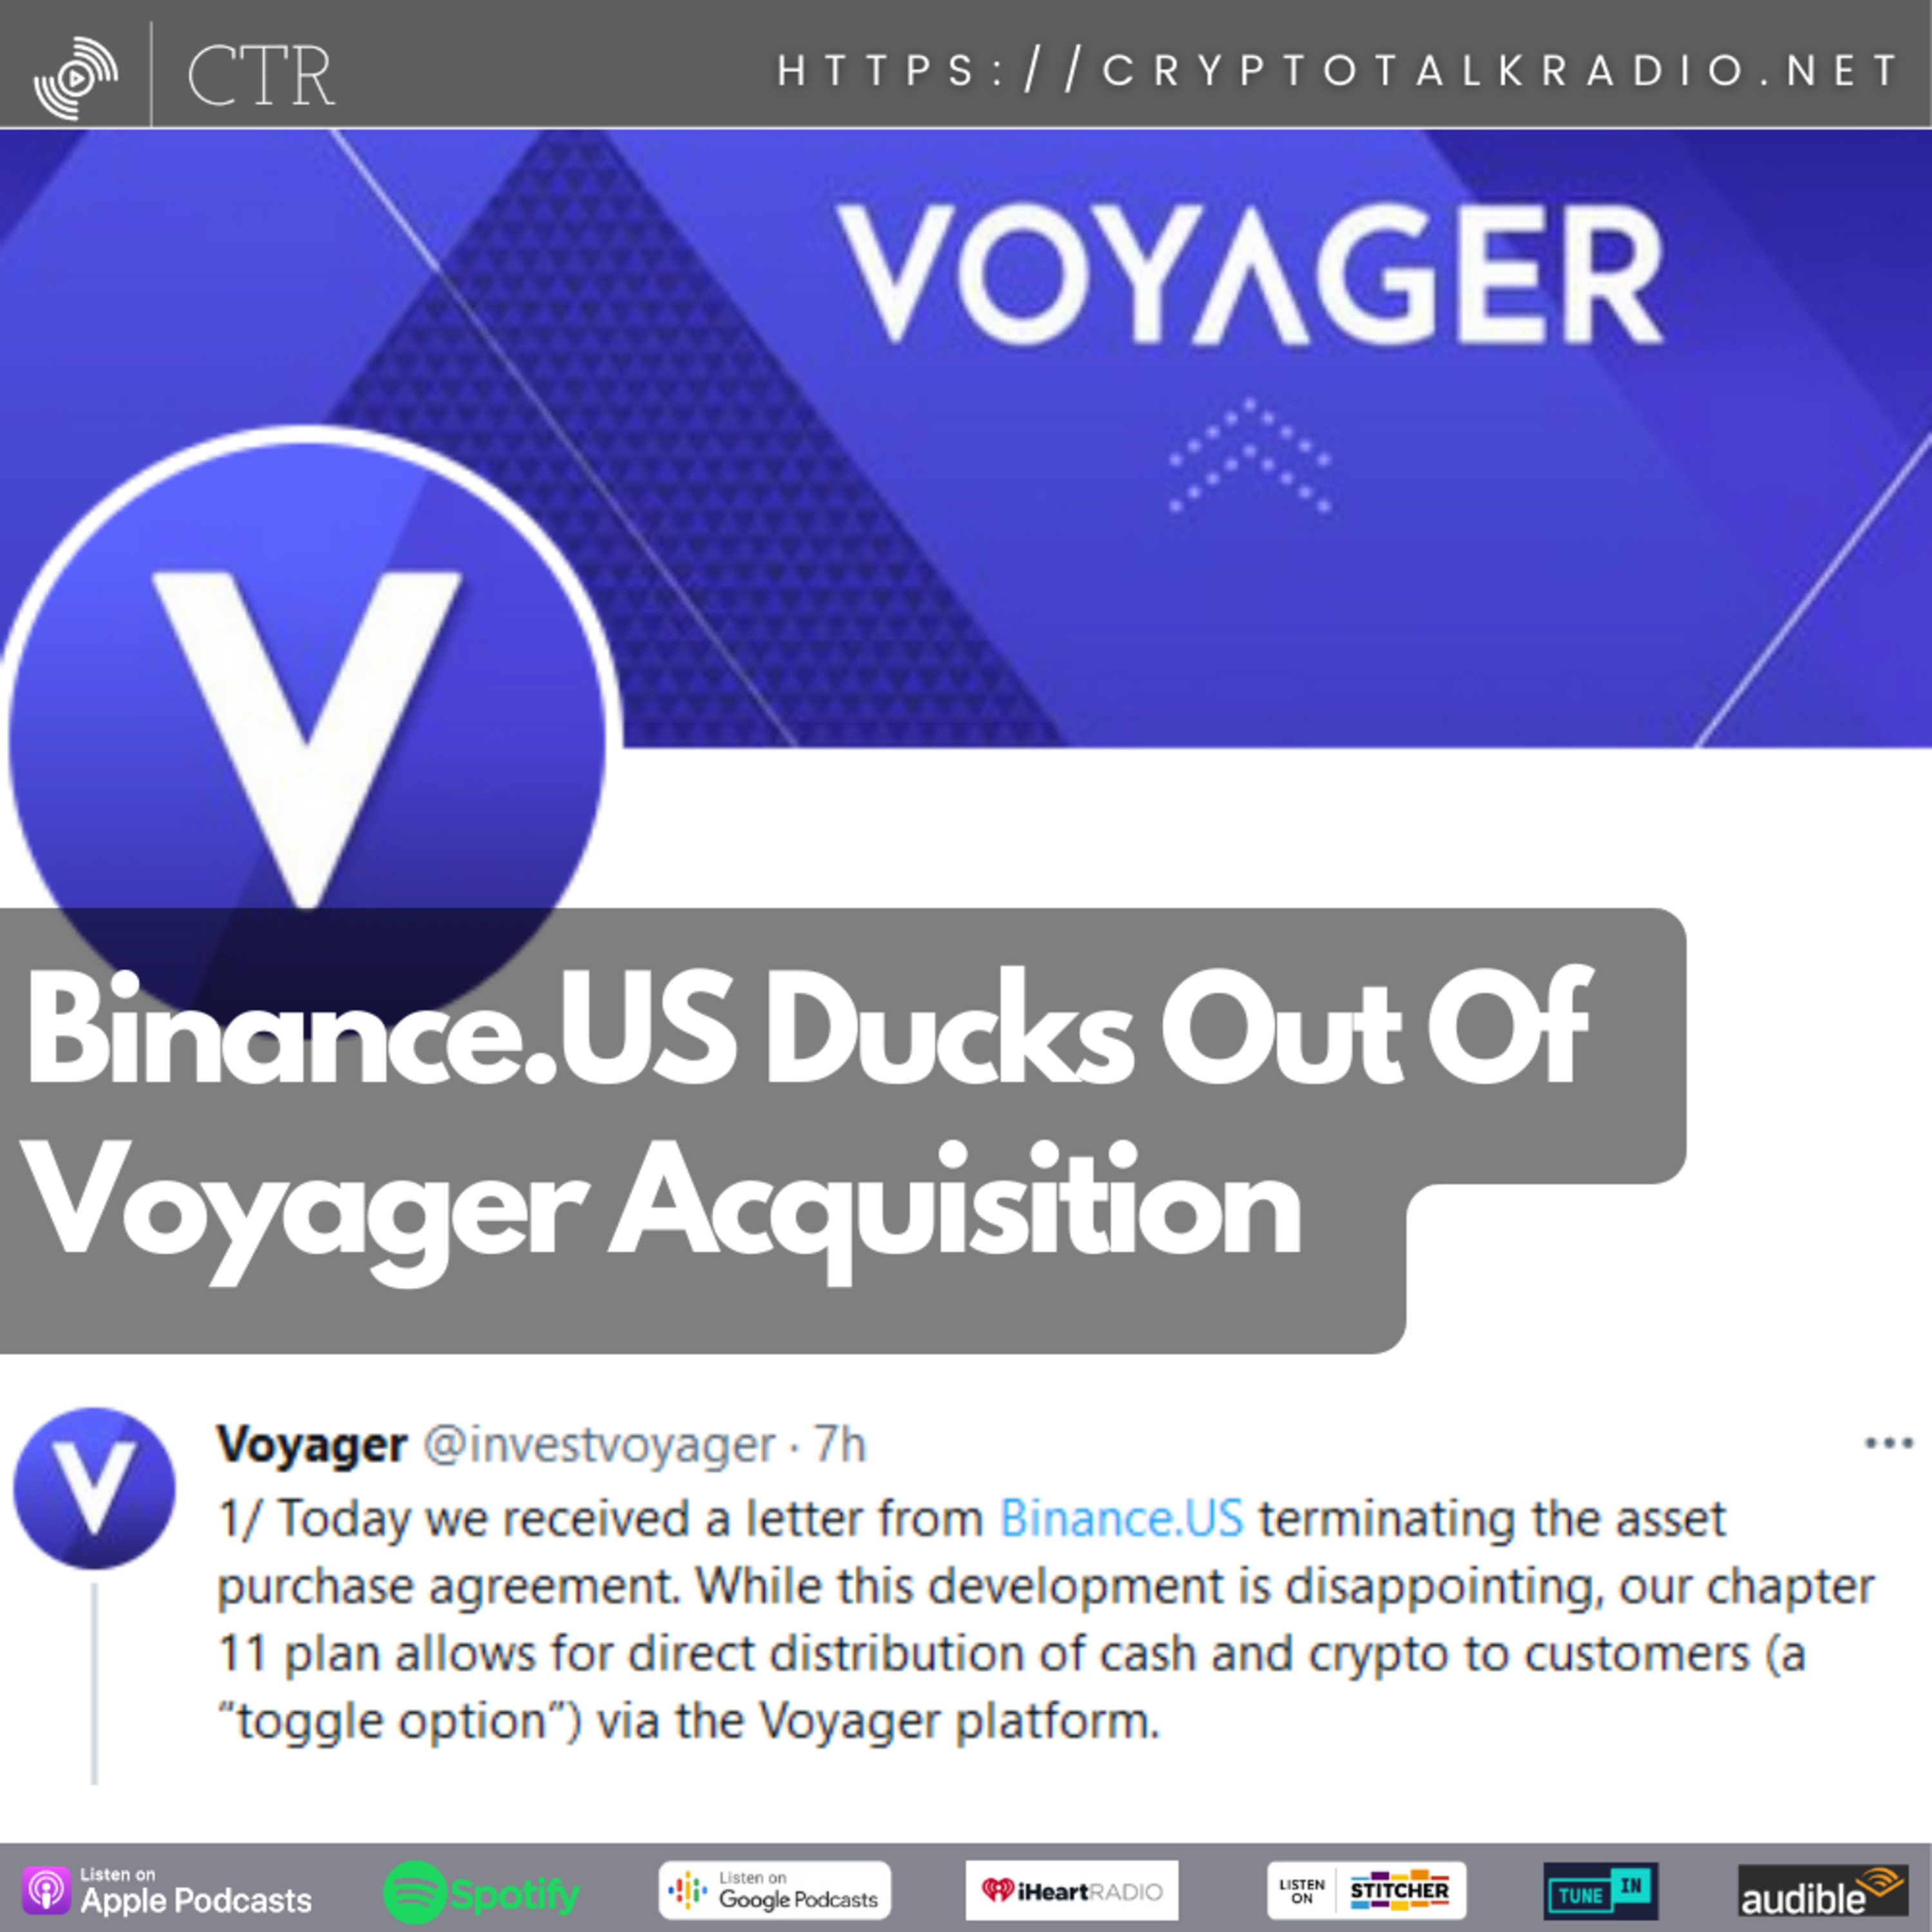 Binance.US Ducks Out Of Voyager Acquisition